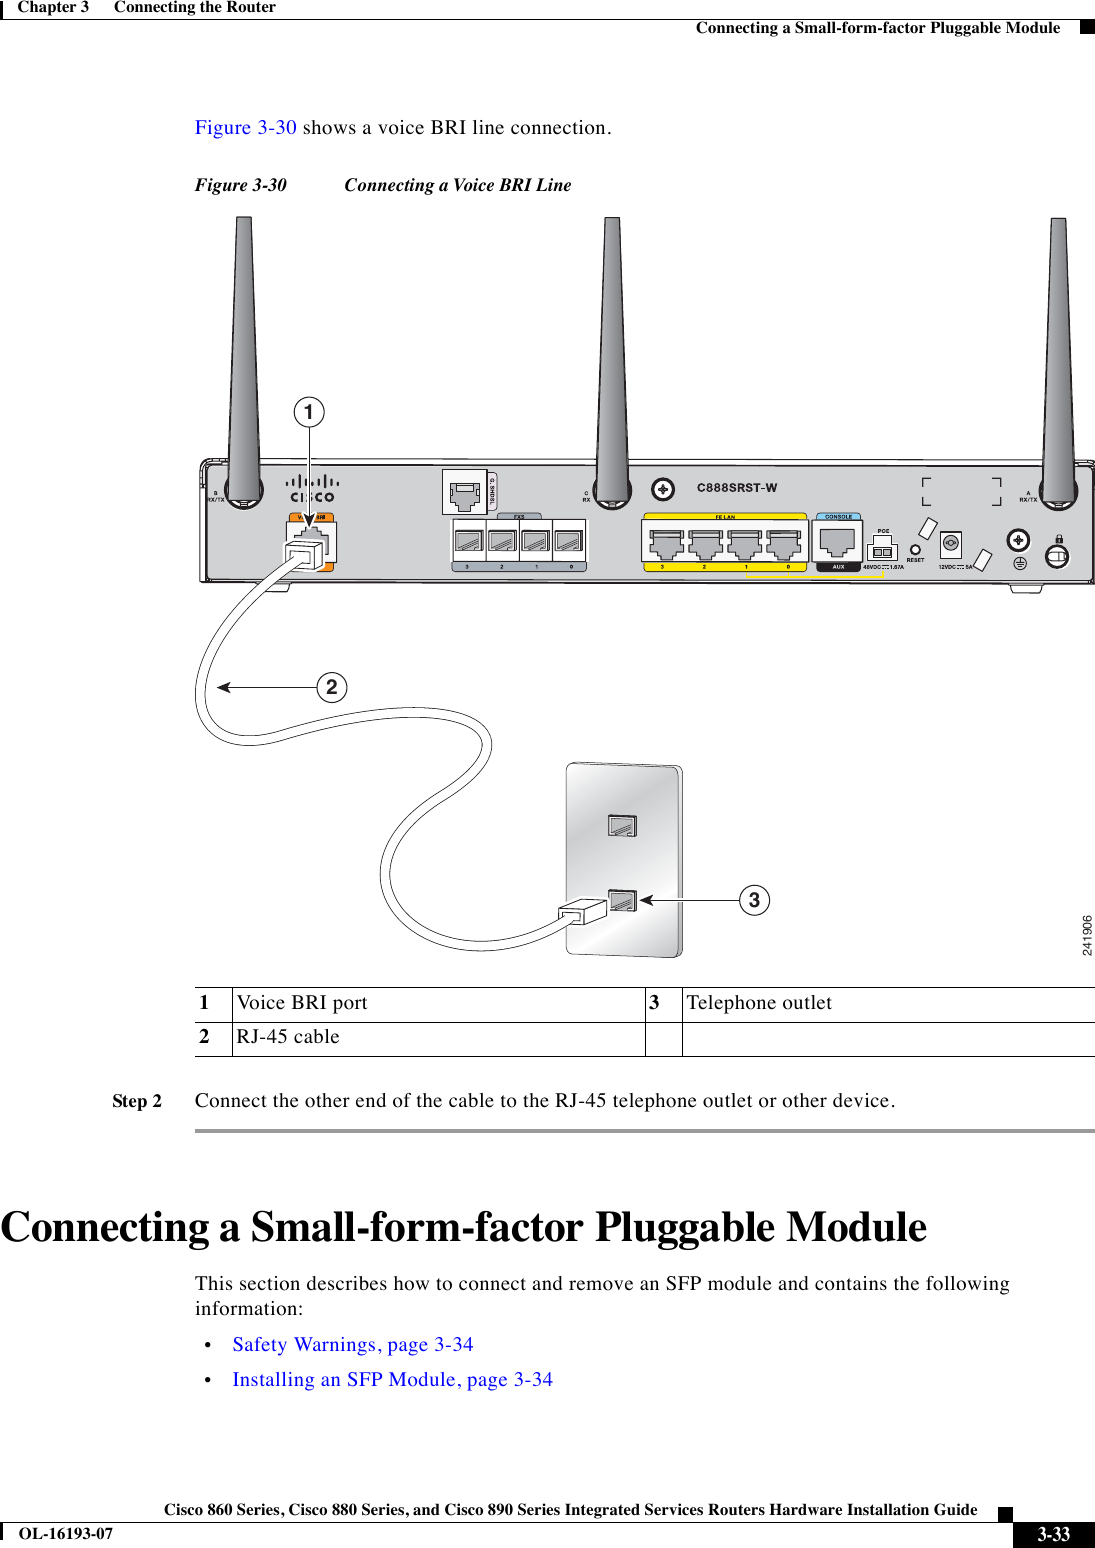  3-33Cisco 860 Series, Cisco 880 Series, and Cisco 890 Series Integrated Services Routers Hardware Installation GuideOL-16193-07Chapter 3      Connecting the Router  Connecting a Small-form-factor Pluggable ModuleFigure 3-30 shows a voice BRI line connection.Figure 3-30 Connecting a Voice BRI LineStep 2Connect the other end of the cable to the RJ-45 telephone outlet or other device. Connecting a Small-form-factor Pluggable ModuleThis section describes how to connect and remove an SFP module and contains the following information:  •Safety Warnings, page 3-34  •Installing an SFP Module, page 3-341Voice BRI port 3Telephone outlet2RJ-45 cable241906132